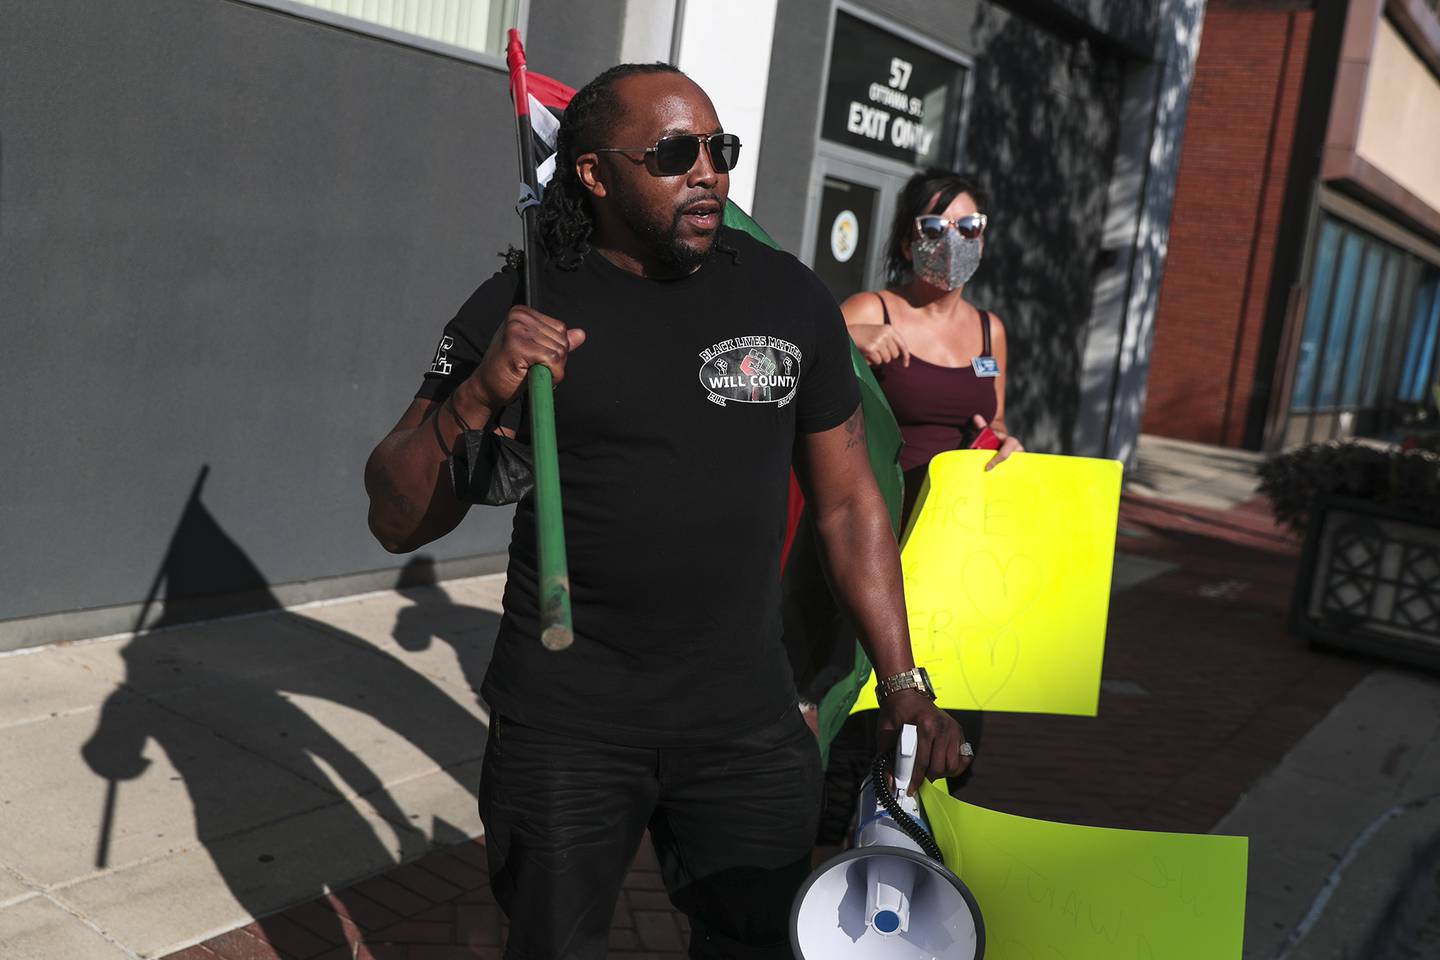 Joliet Black Lives Matter activist Karl Ferrell marches to call for further investigation into the death of Eric Lurry, a Joliet resident who died while in police custody, on Friday, Sept. 17, 2021, outside of the District AttorneyÕs Office in Joliet, Ill.